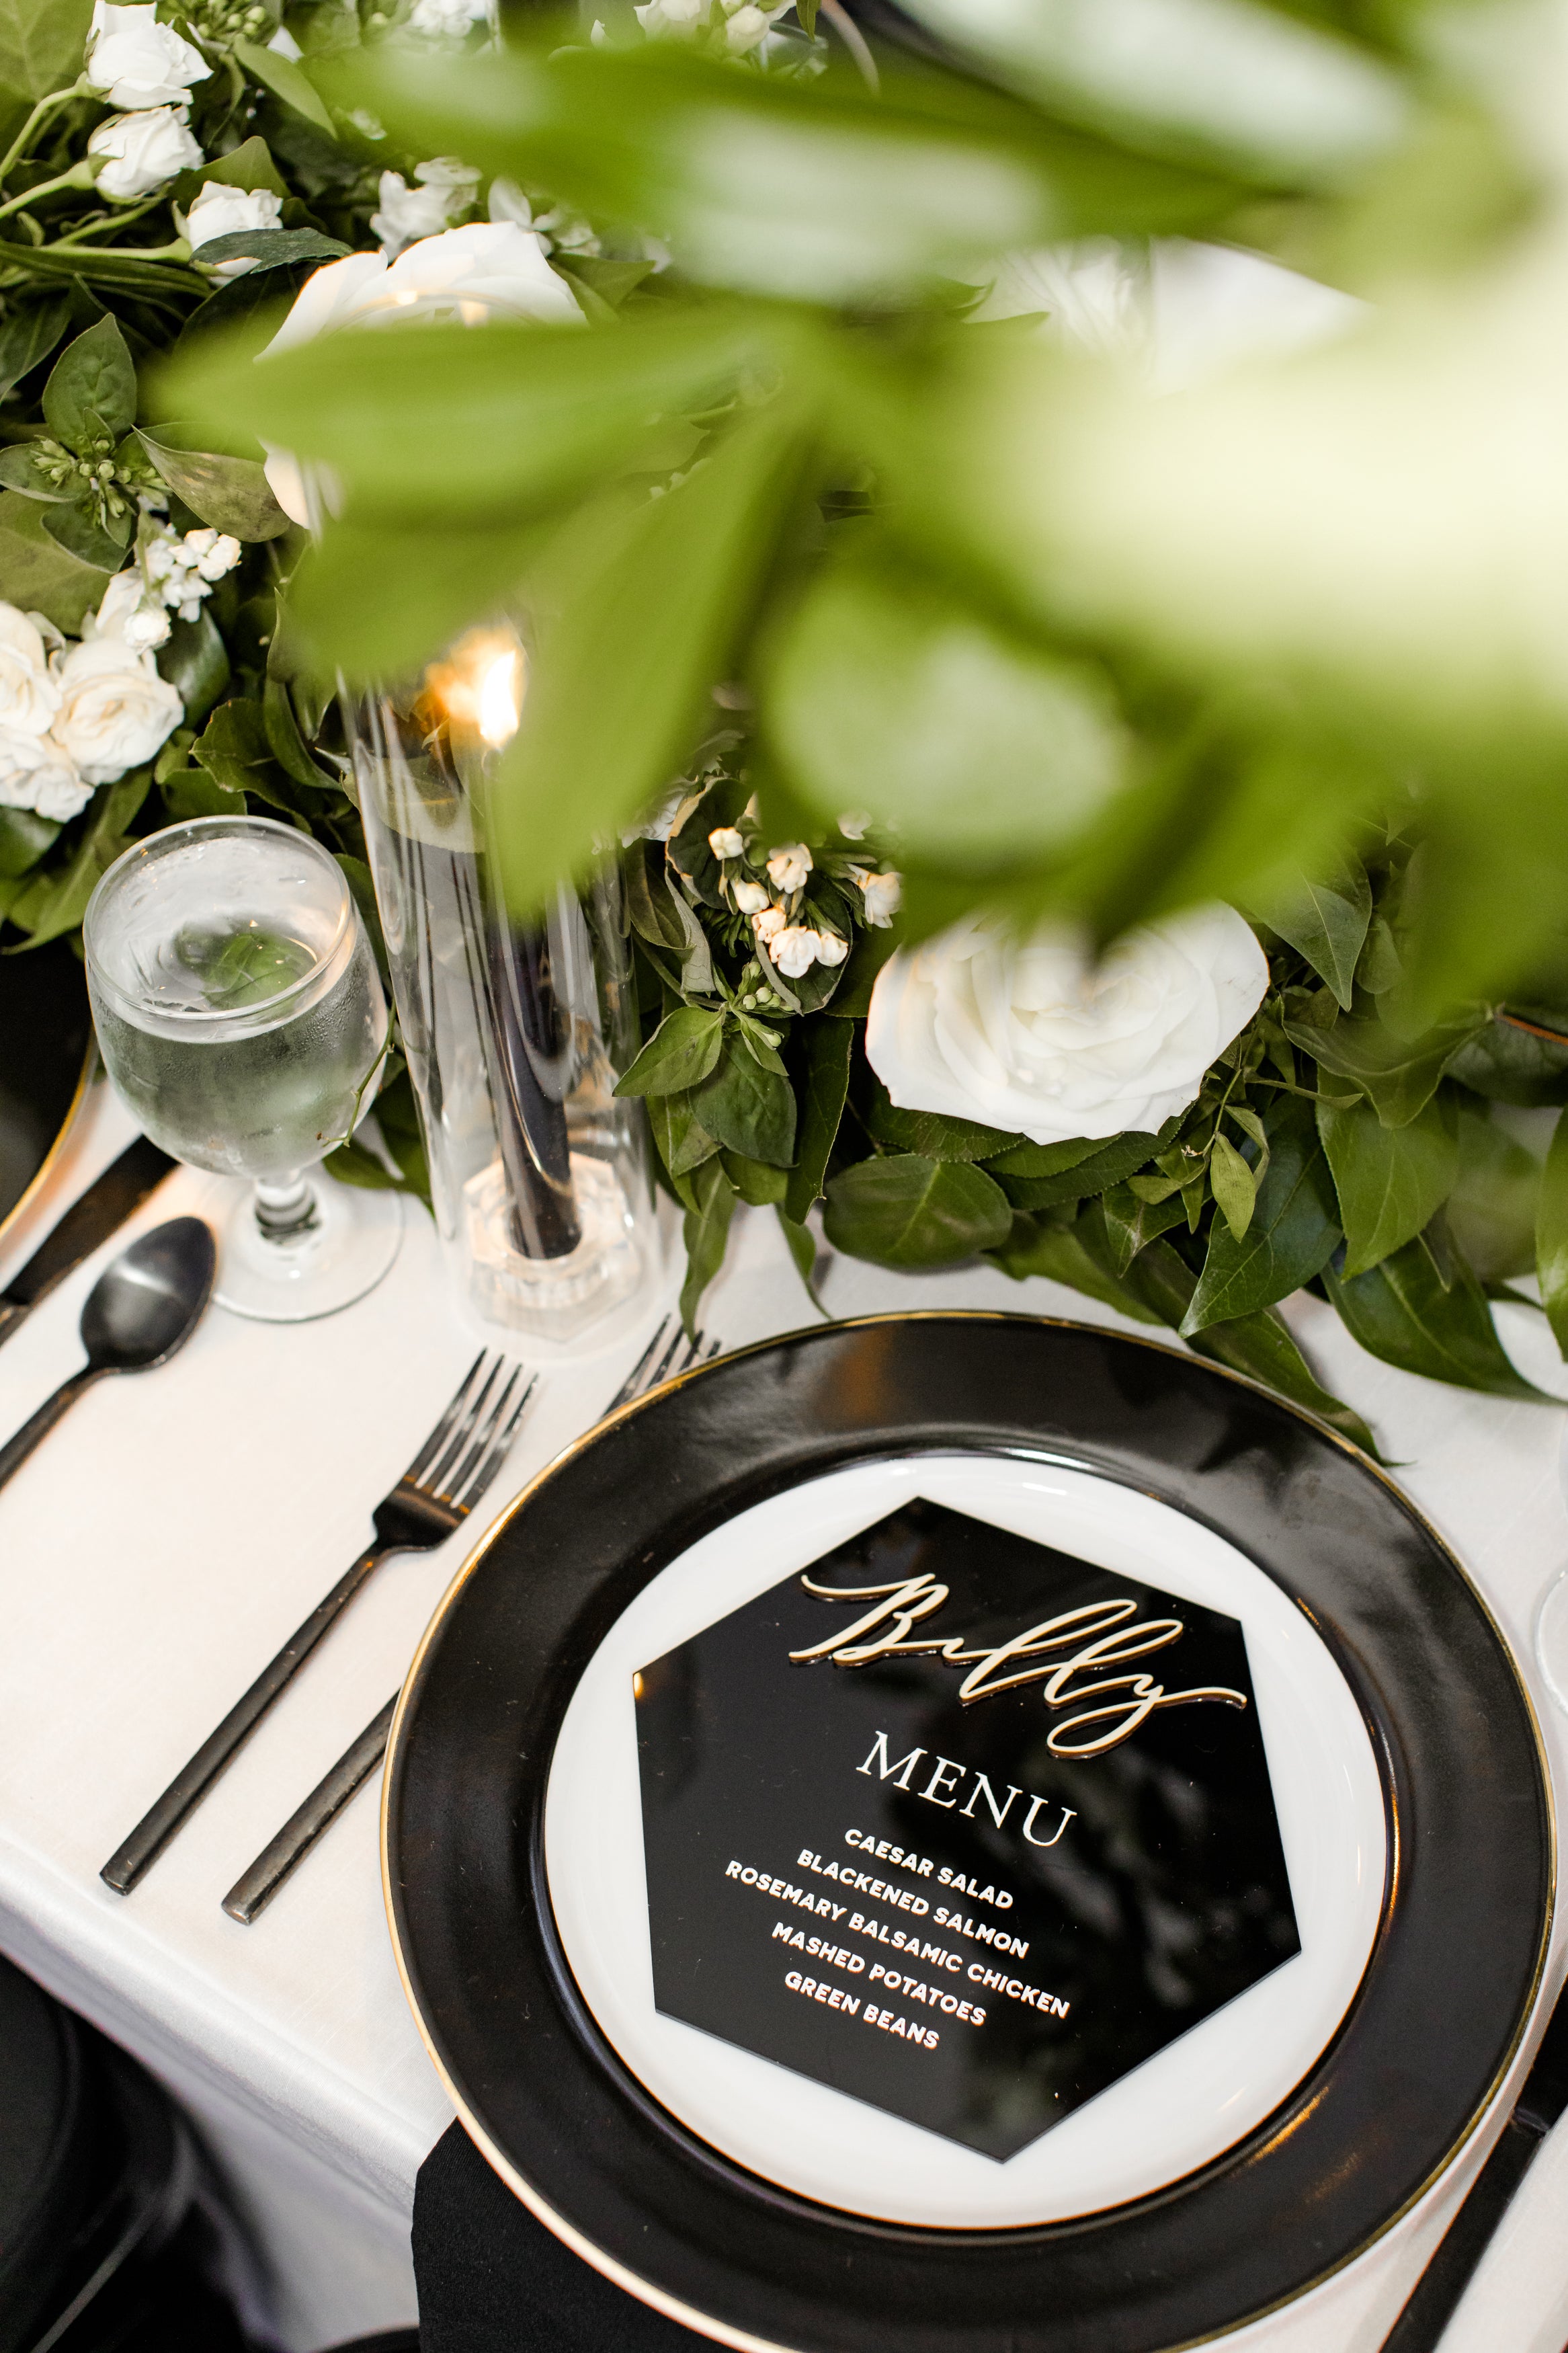 Bridal Bliss: We Loved Maurice and Ebone’s Beautiful Black Tie Wedding Vibes